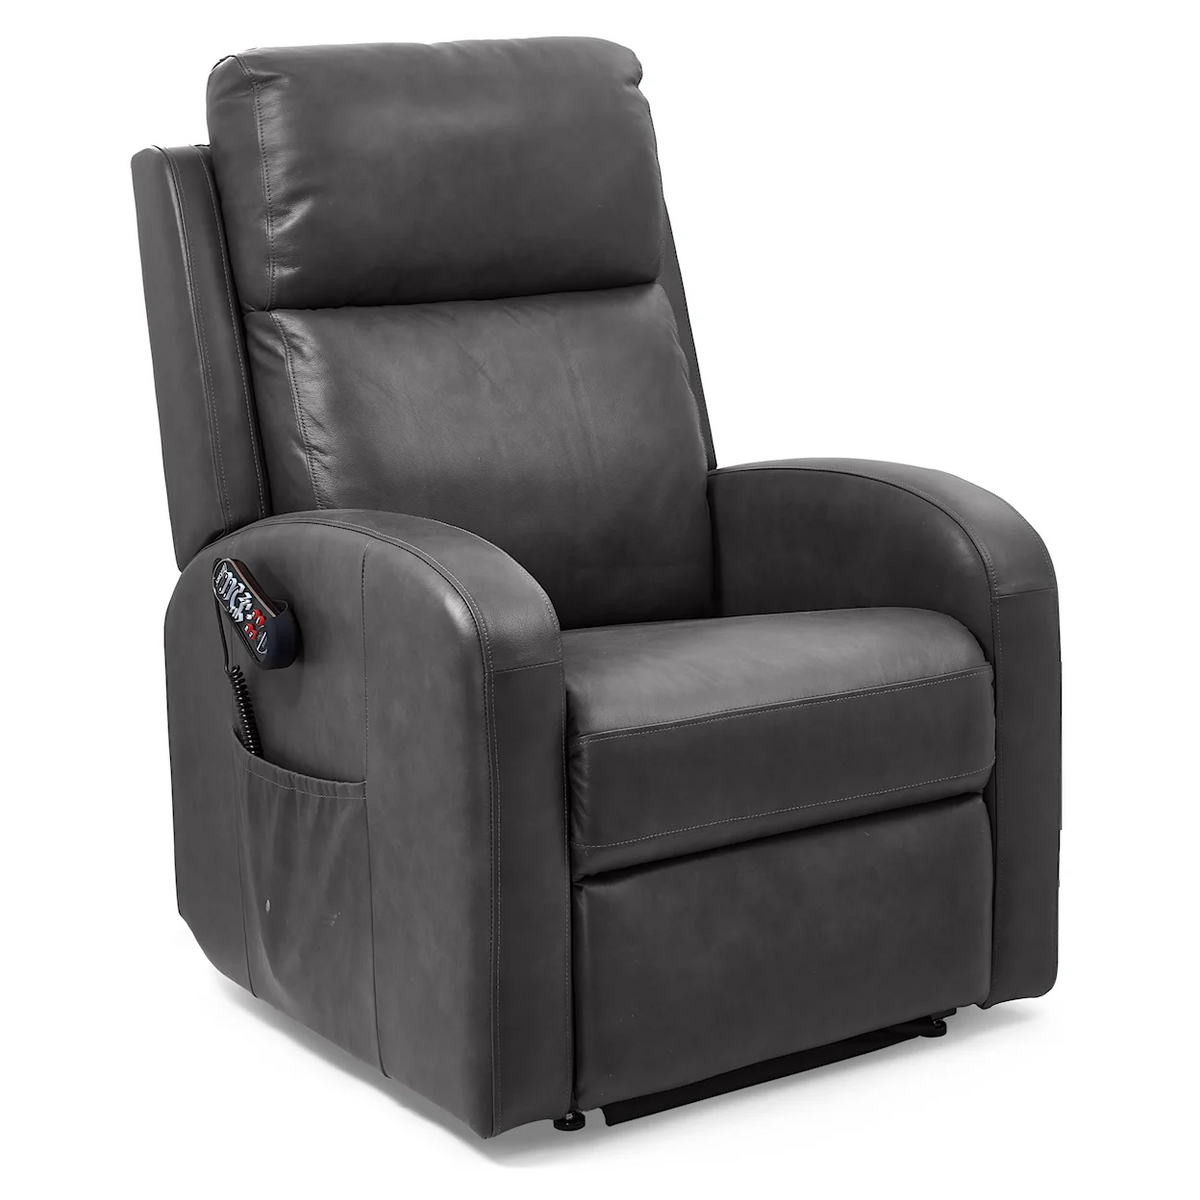 UltraComfort UC673 5-Zone Power Lift Chair Recliner